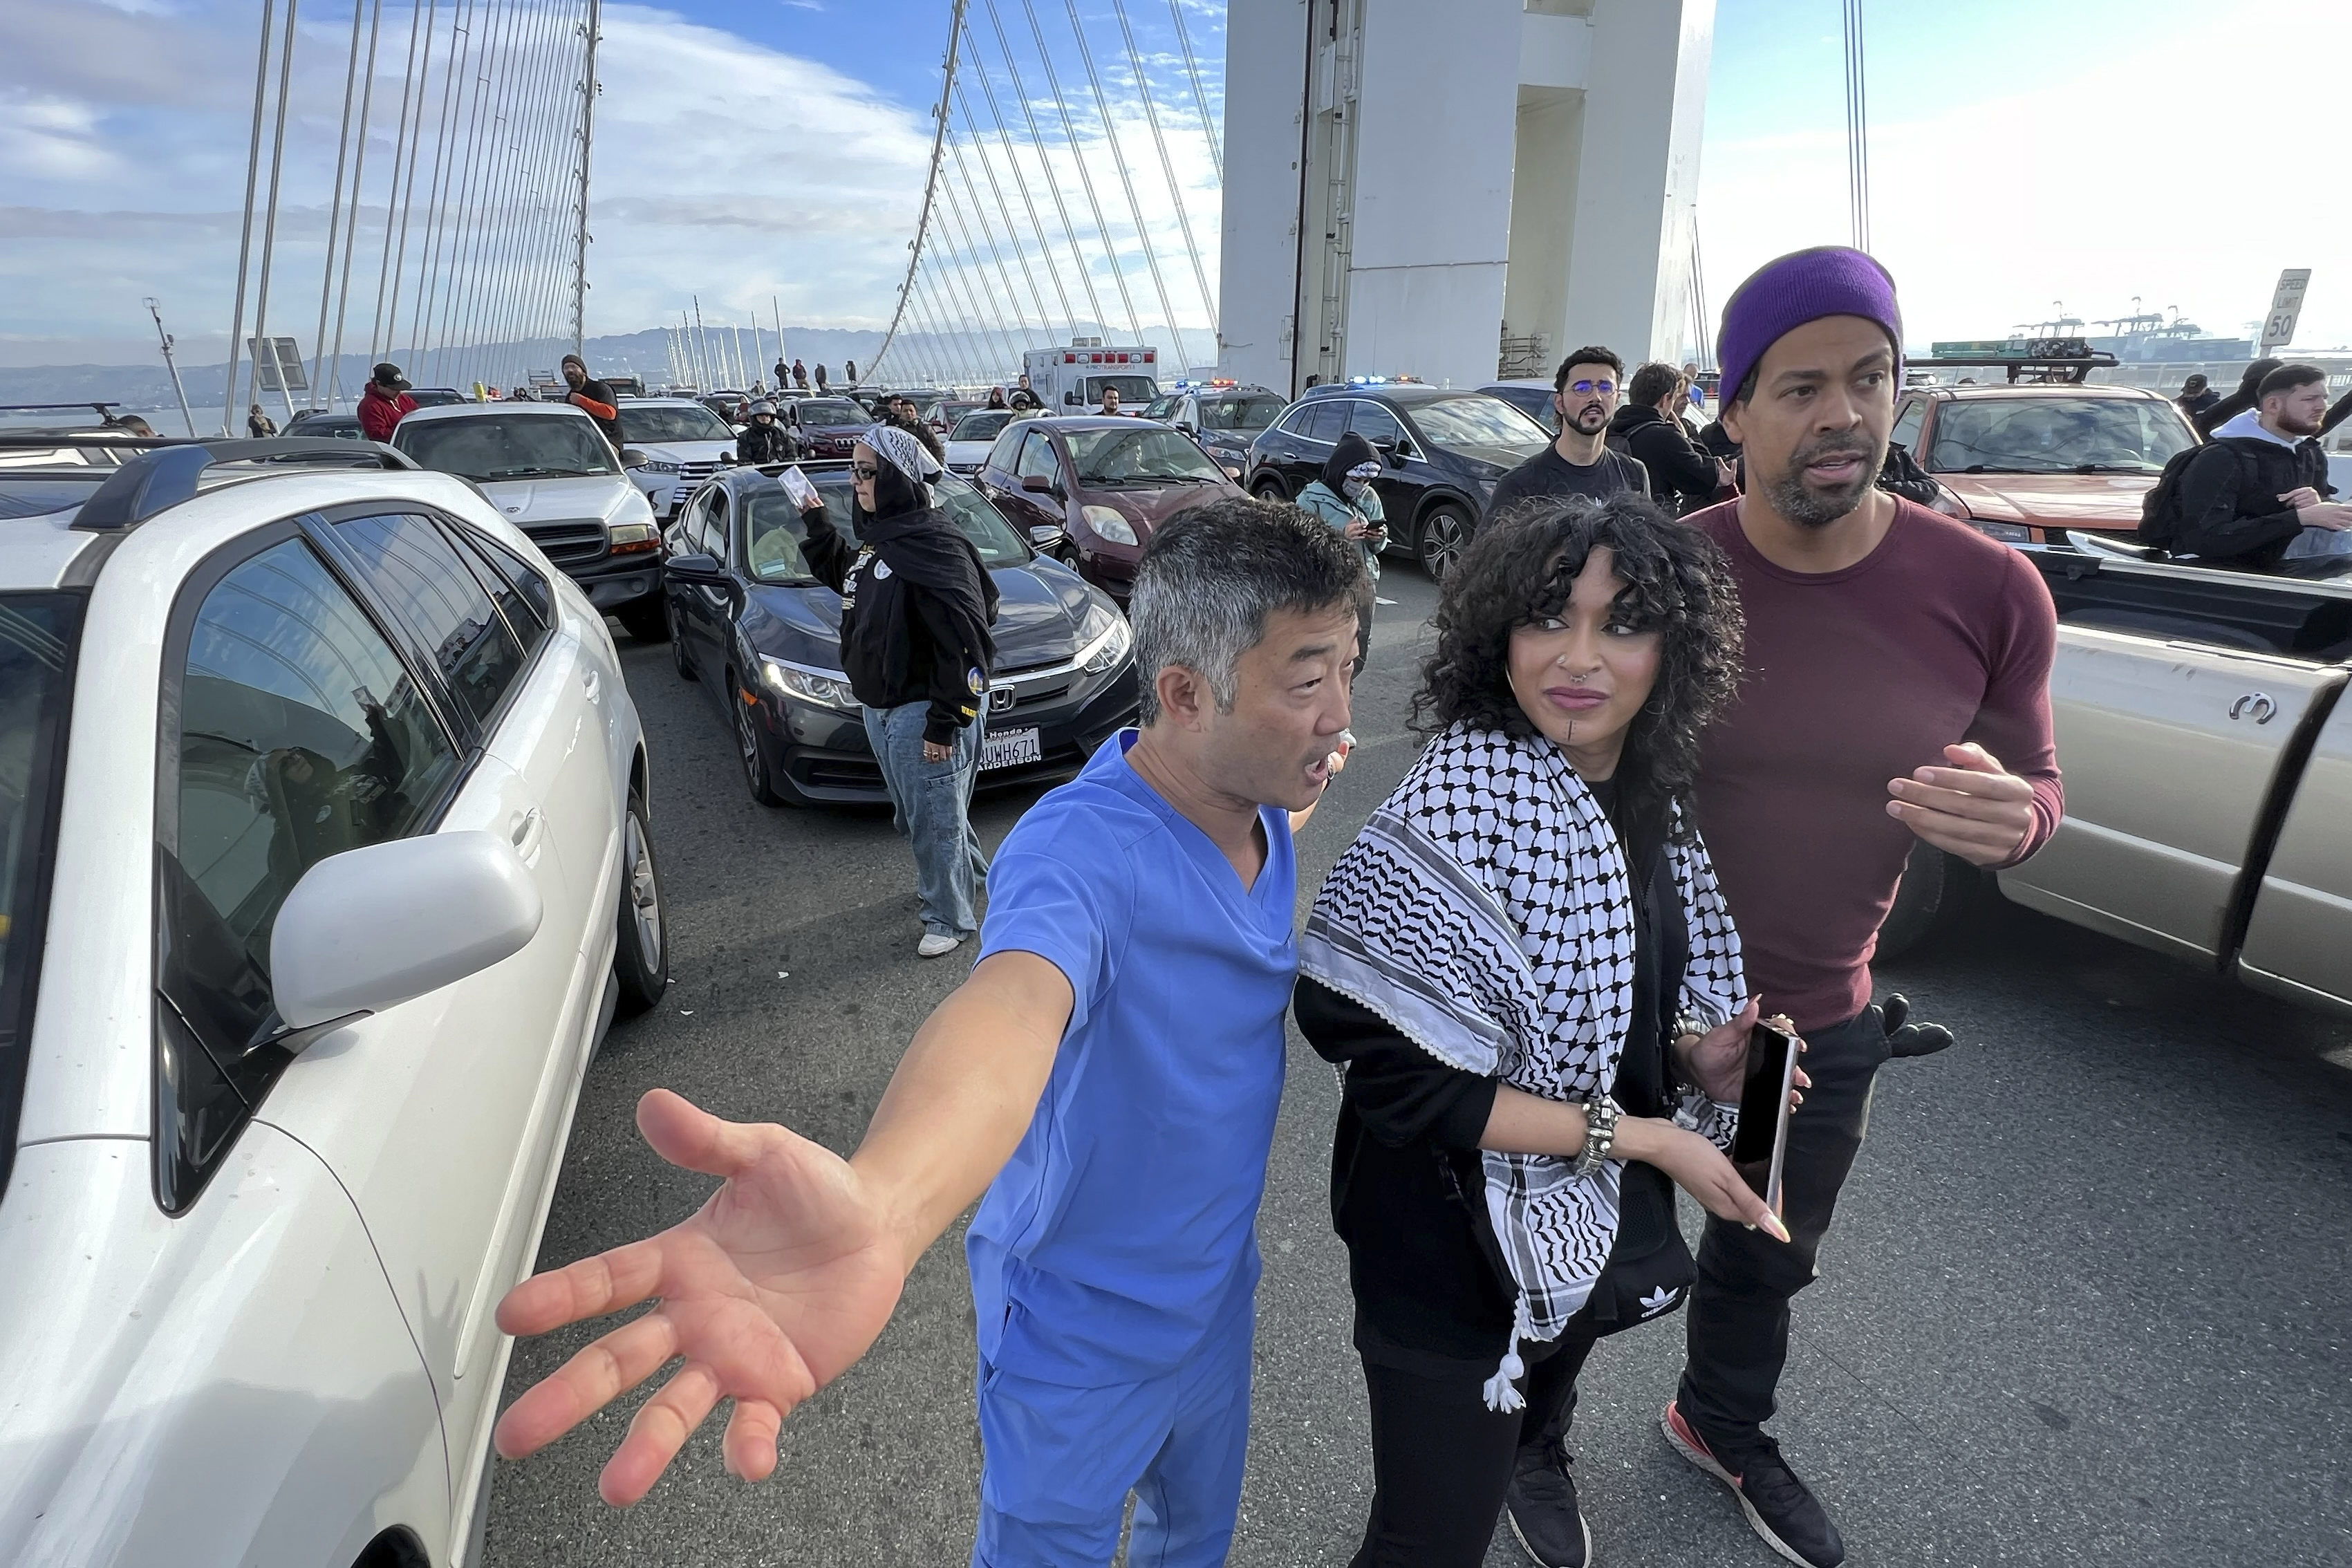 An exasperated person with their arms spread, yelling in the direction of 2 protesters stands between gridlock traffic during a protest on the Bay Bridge.